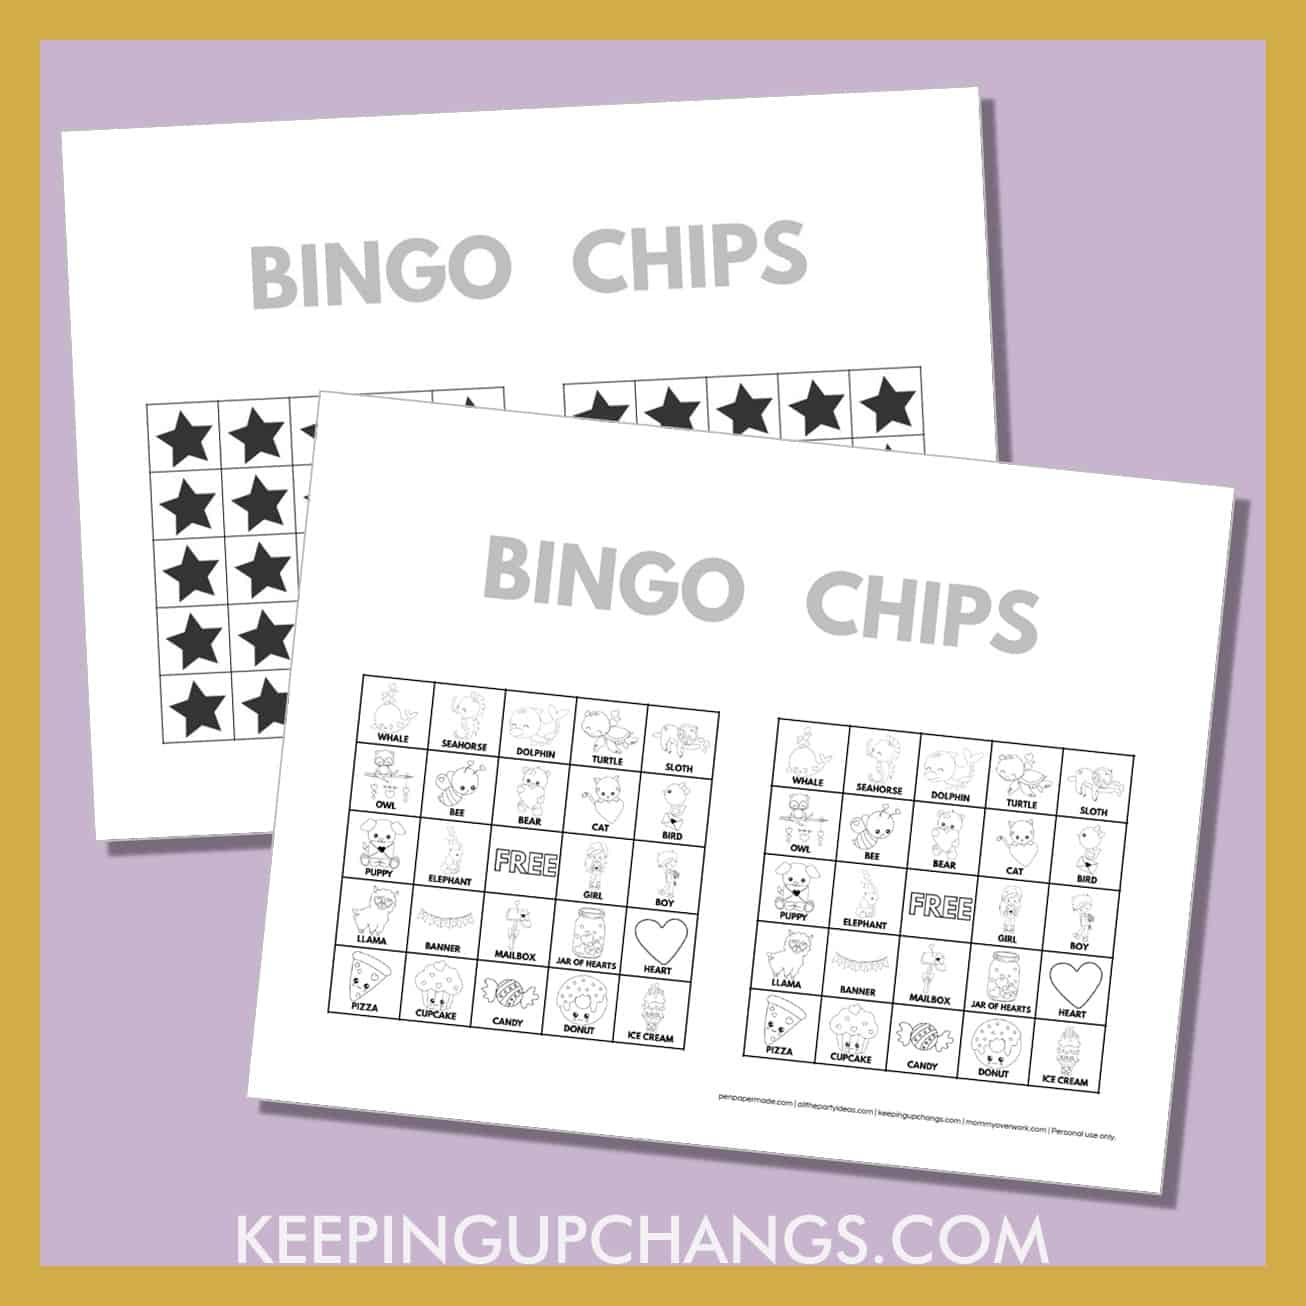 free valentine's day bingo card 5x5 black white coloring game chips, tokens, markers.